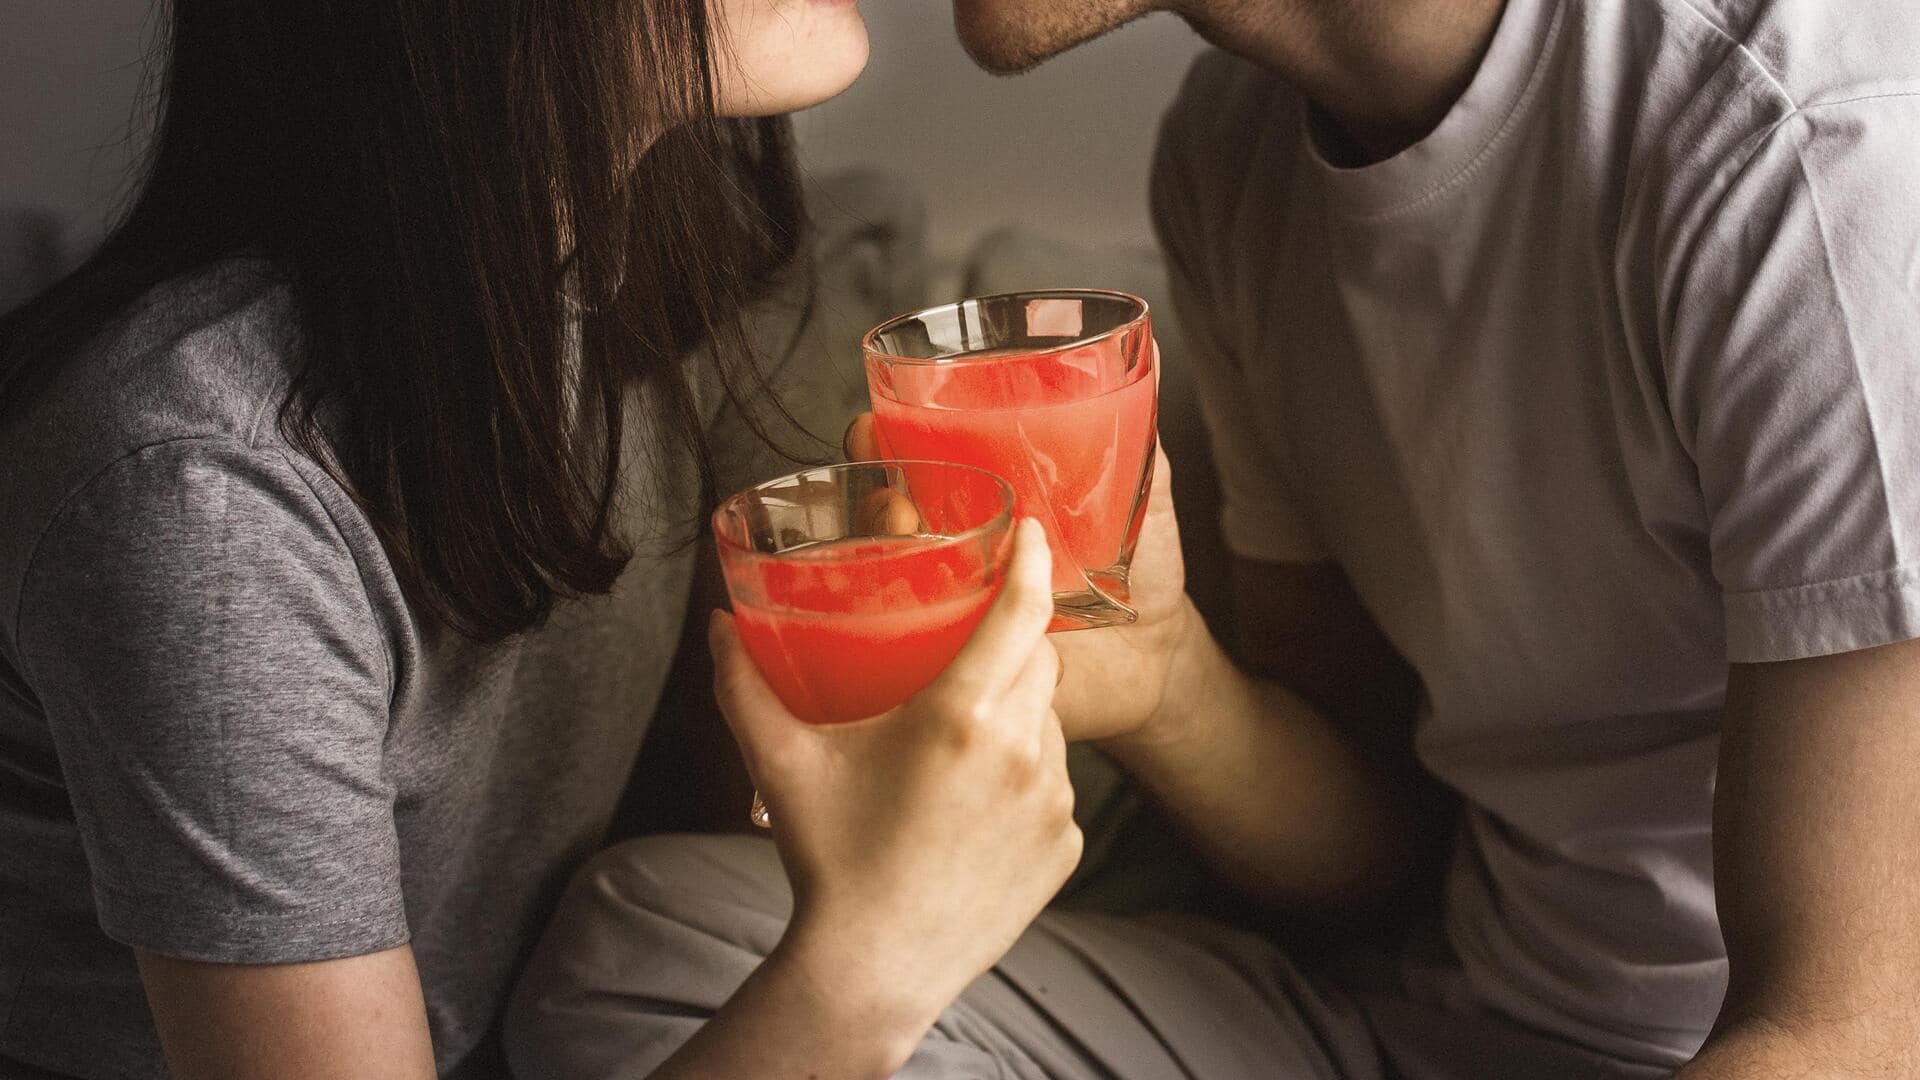 #HealthBytes: Want to boost sexual health? Have these healthy drinks